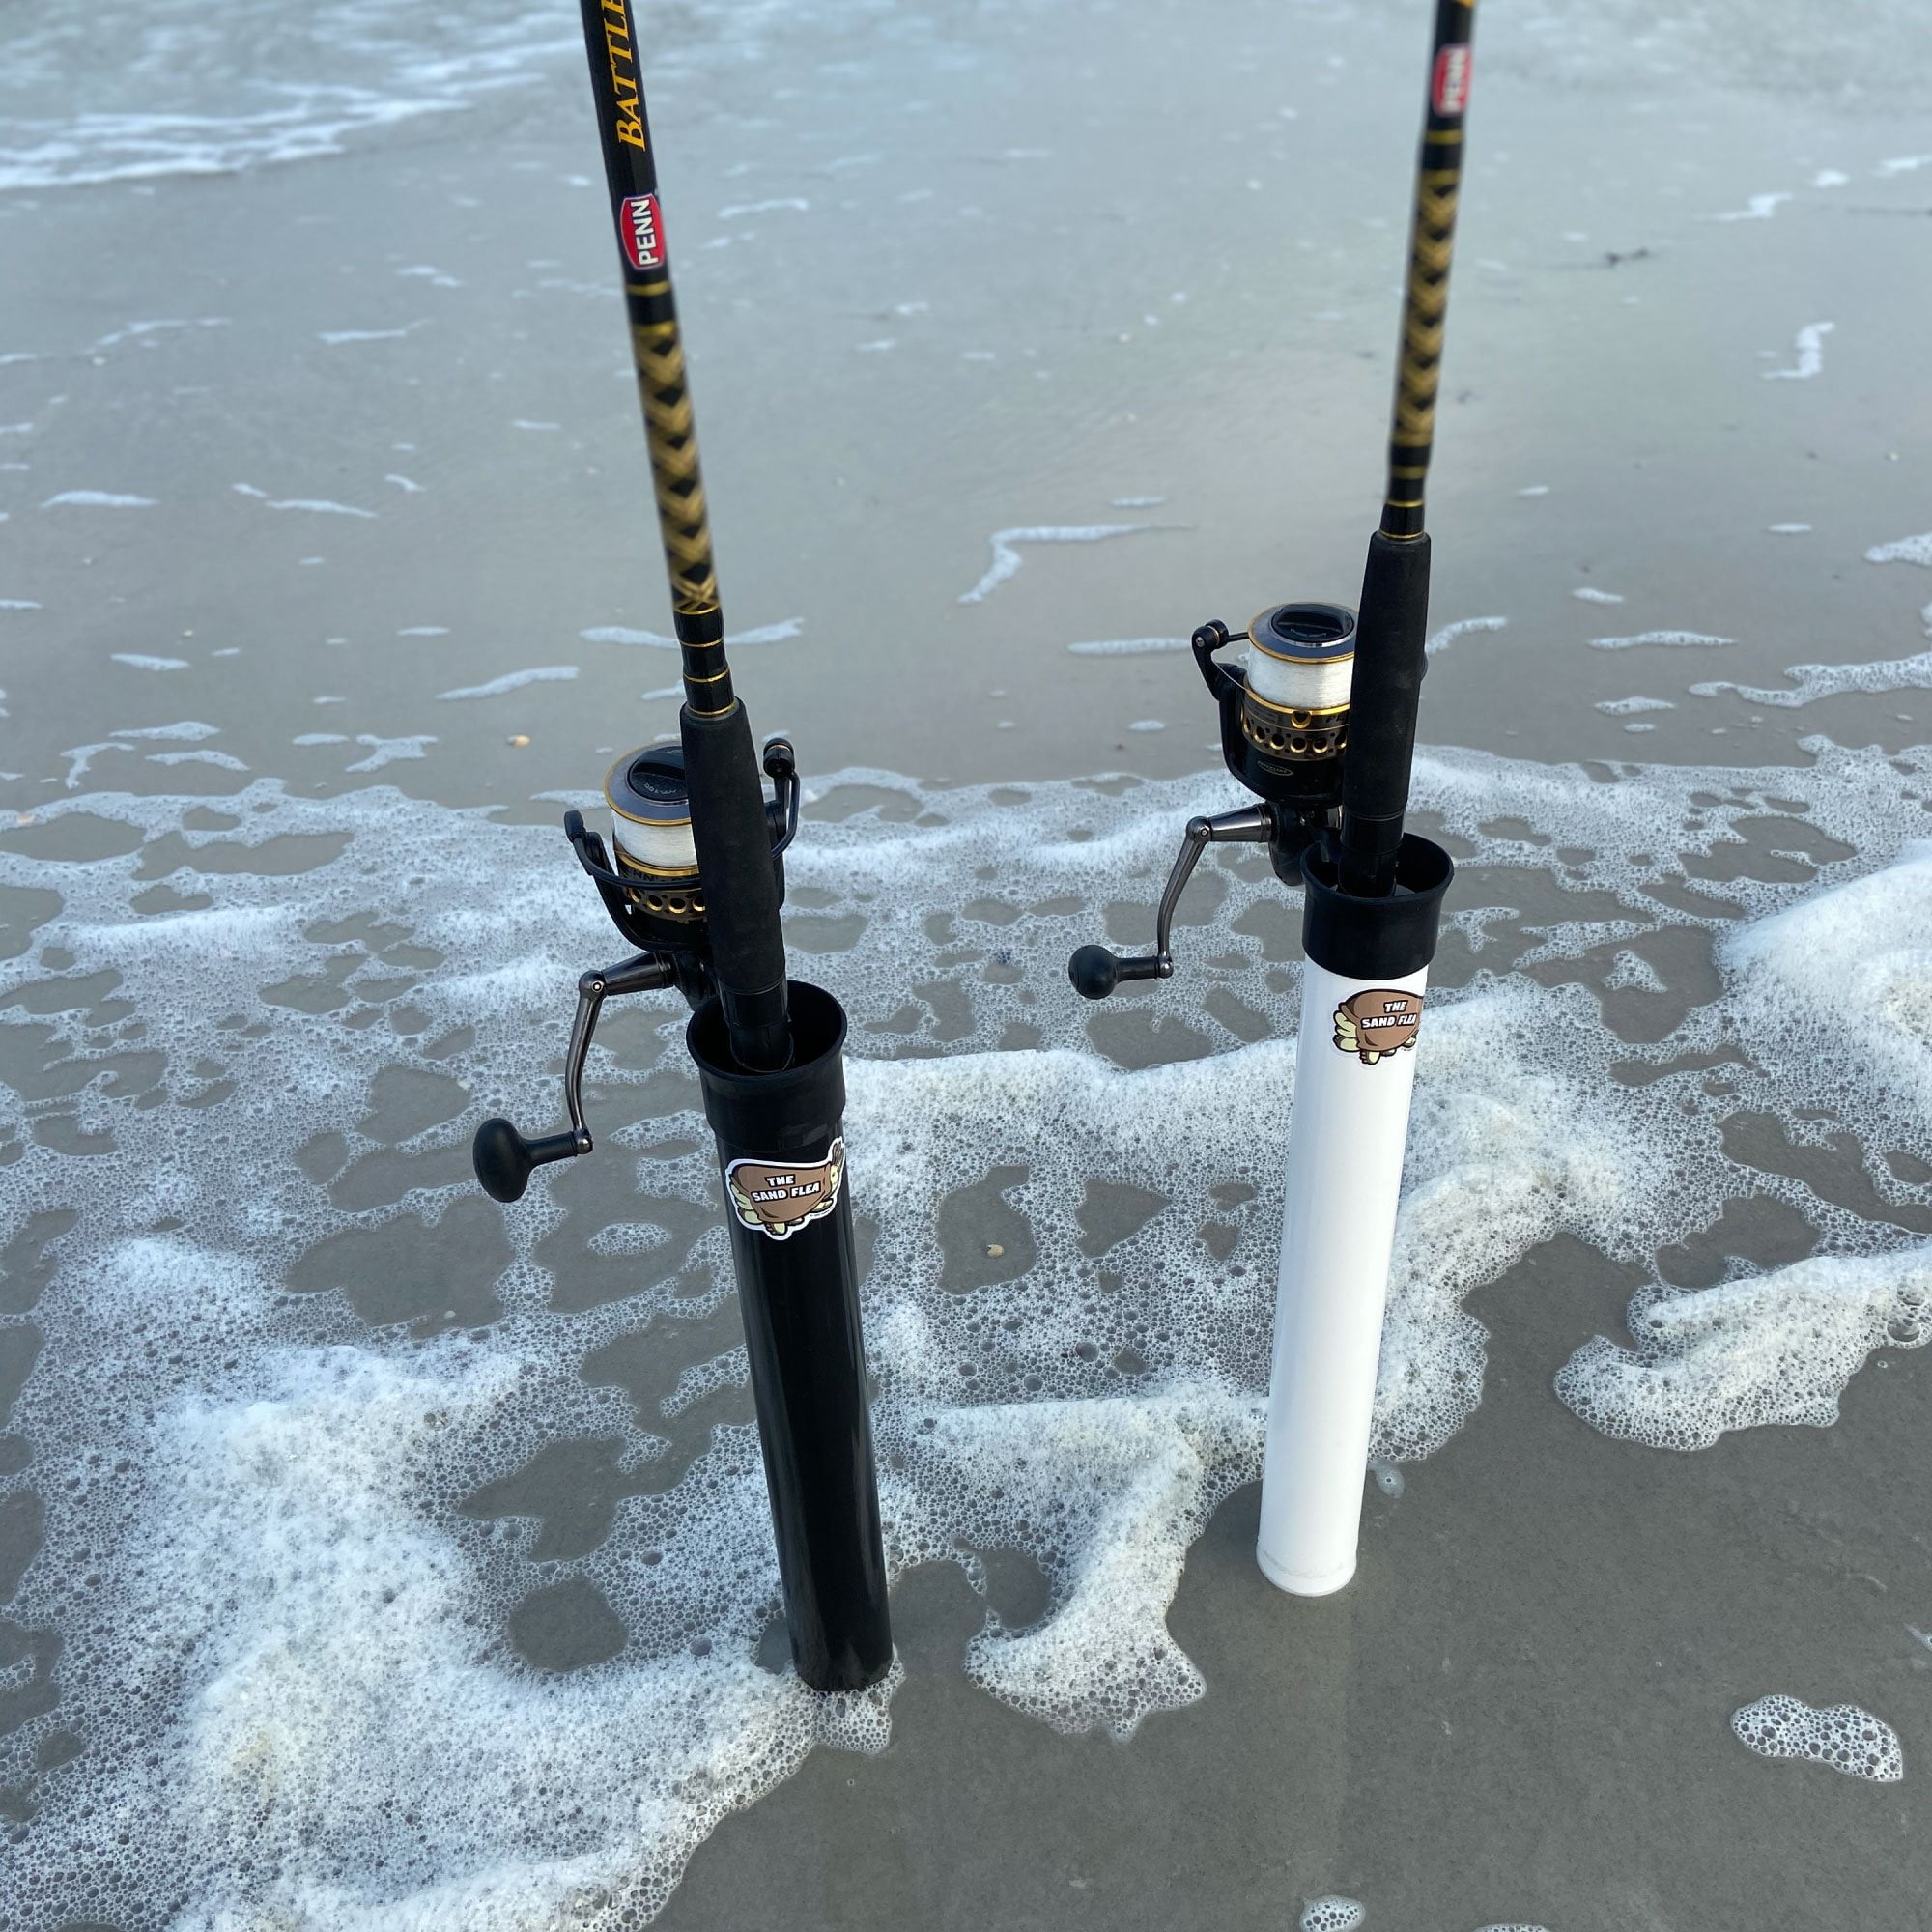 Sand Flea Surf Fishing Rod Holder Beach Sand Spike. 2, 3 or 4 Foot Lengths.  Made from Impact and UV Resistant PVC. 100% USA Made. (Black, 3), Fish  Holders -  Canada